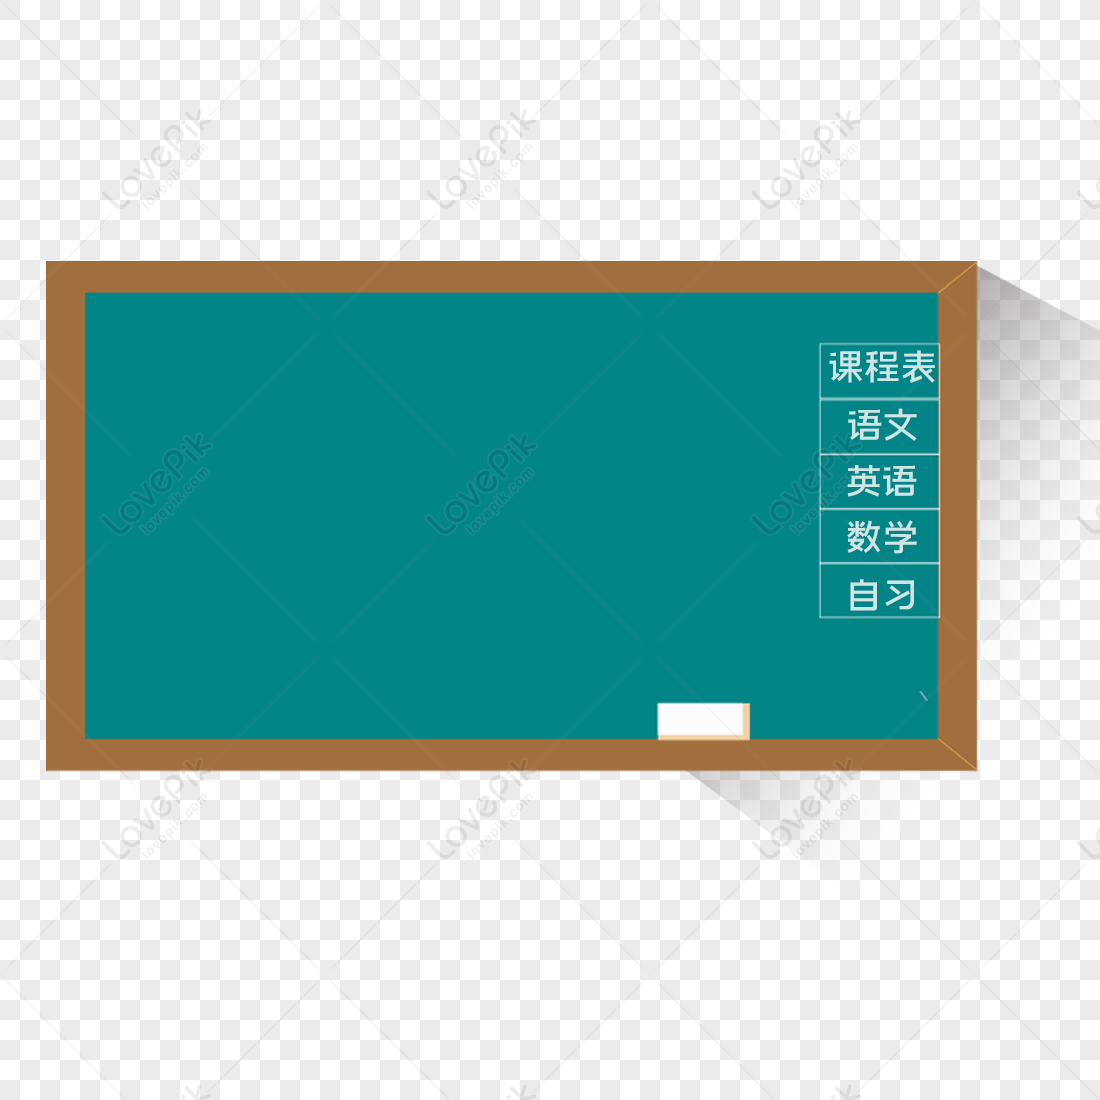 Classroom Blackboard PNG Transparent And Clipart Image For Free Download -  Lovepik | 400182346